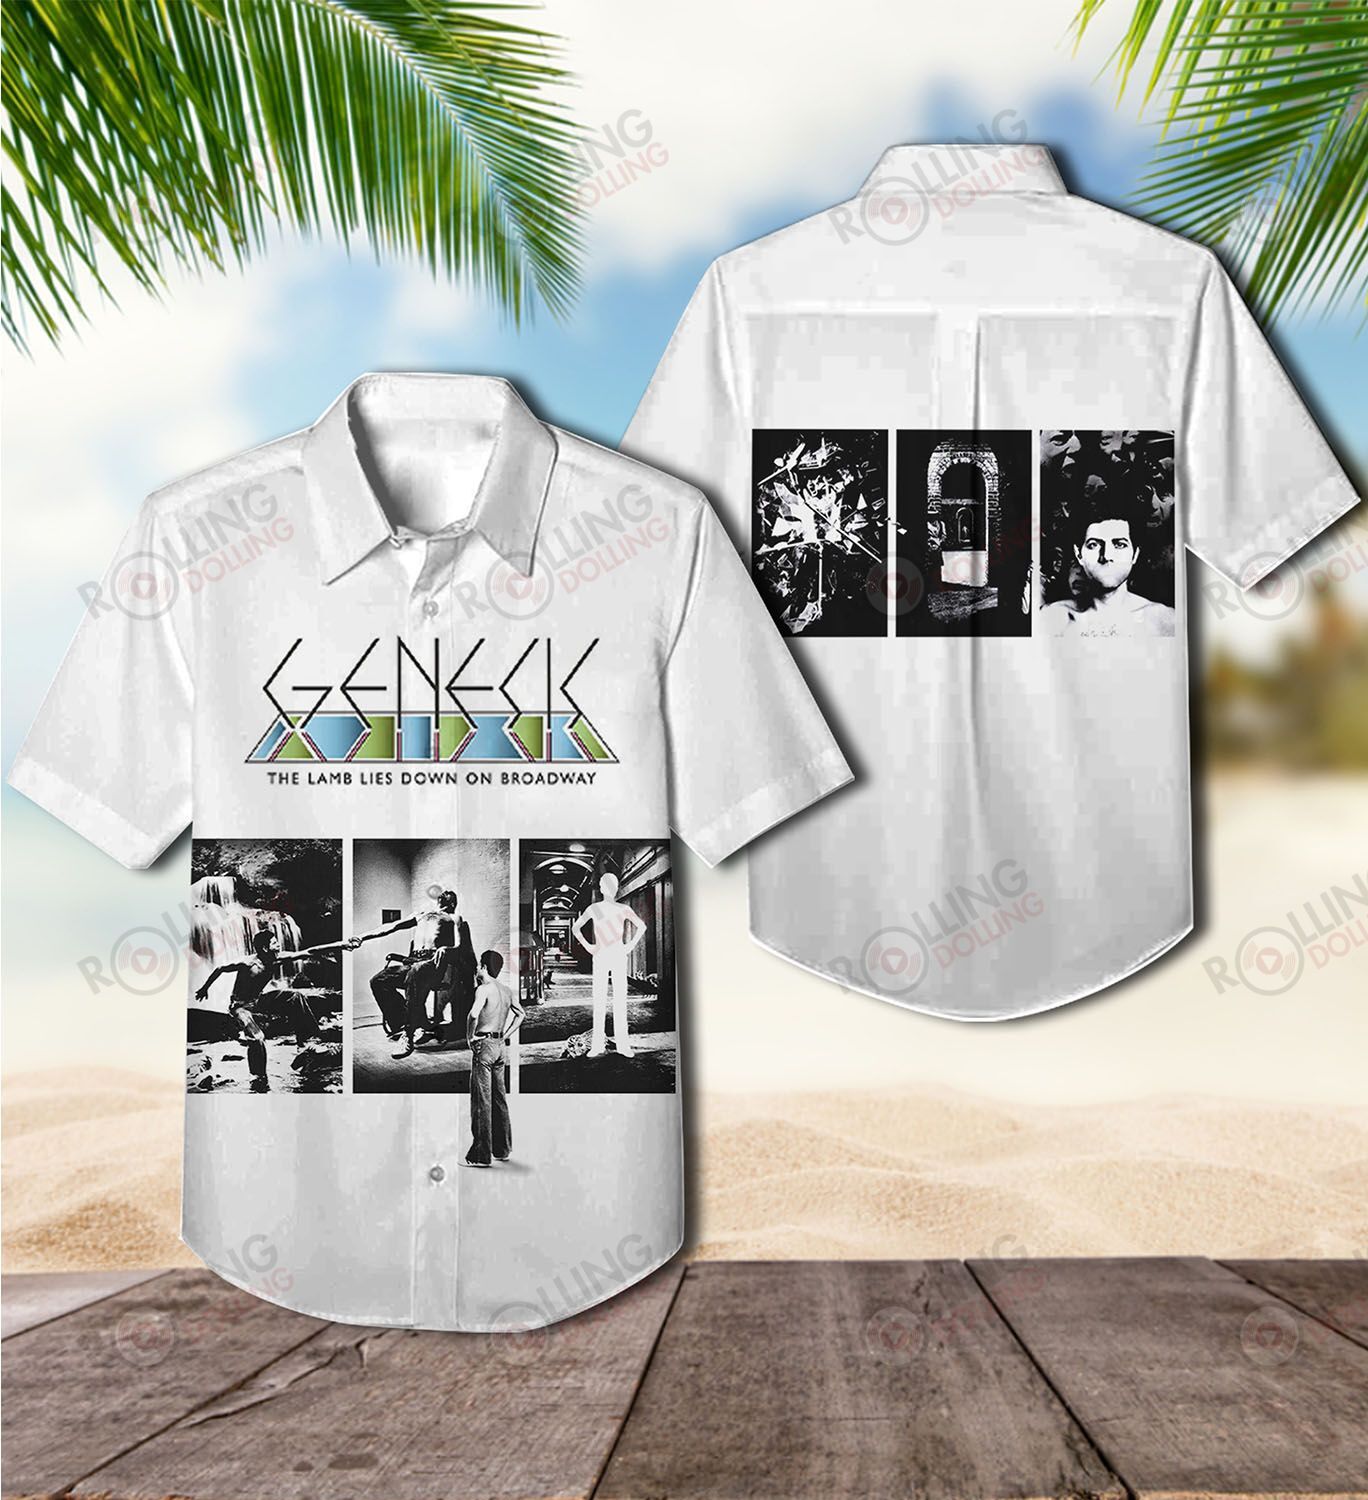 This would make a great gift for any fan who loves Hawaiian Shirt as well as Rock band 58